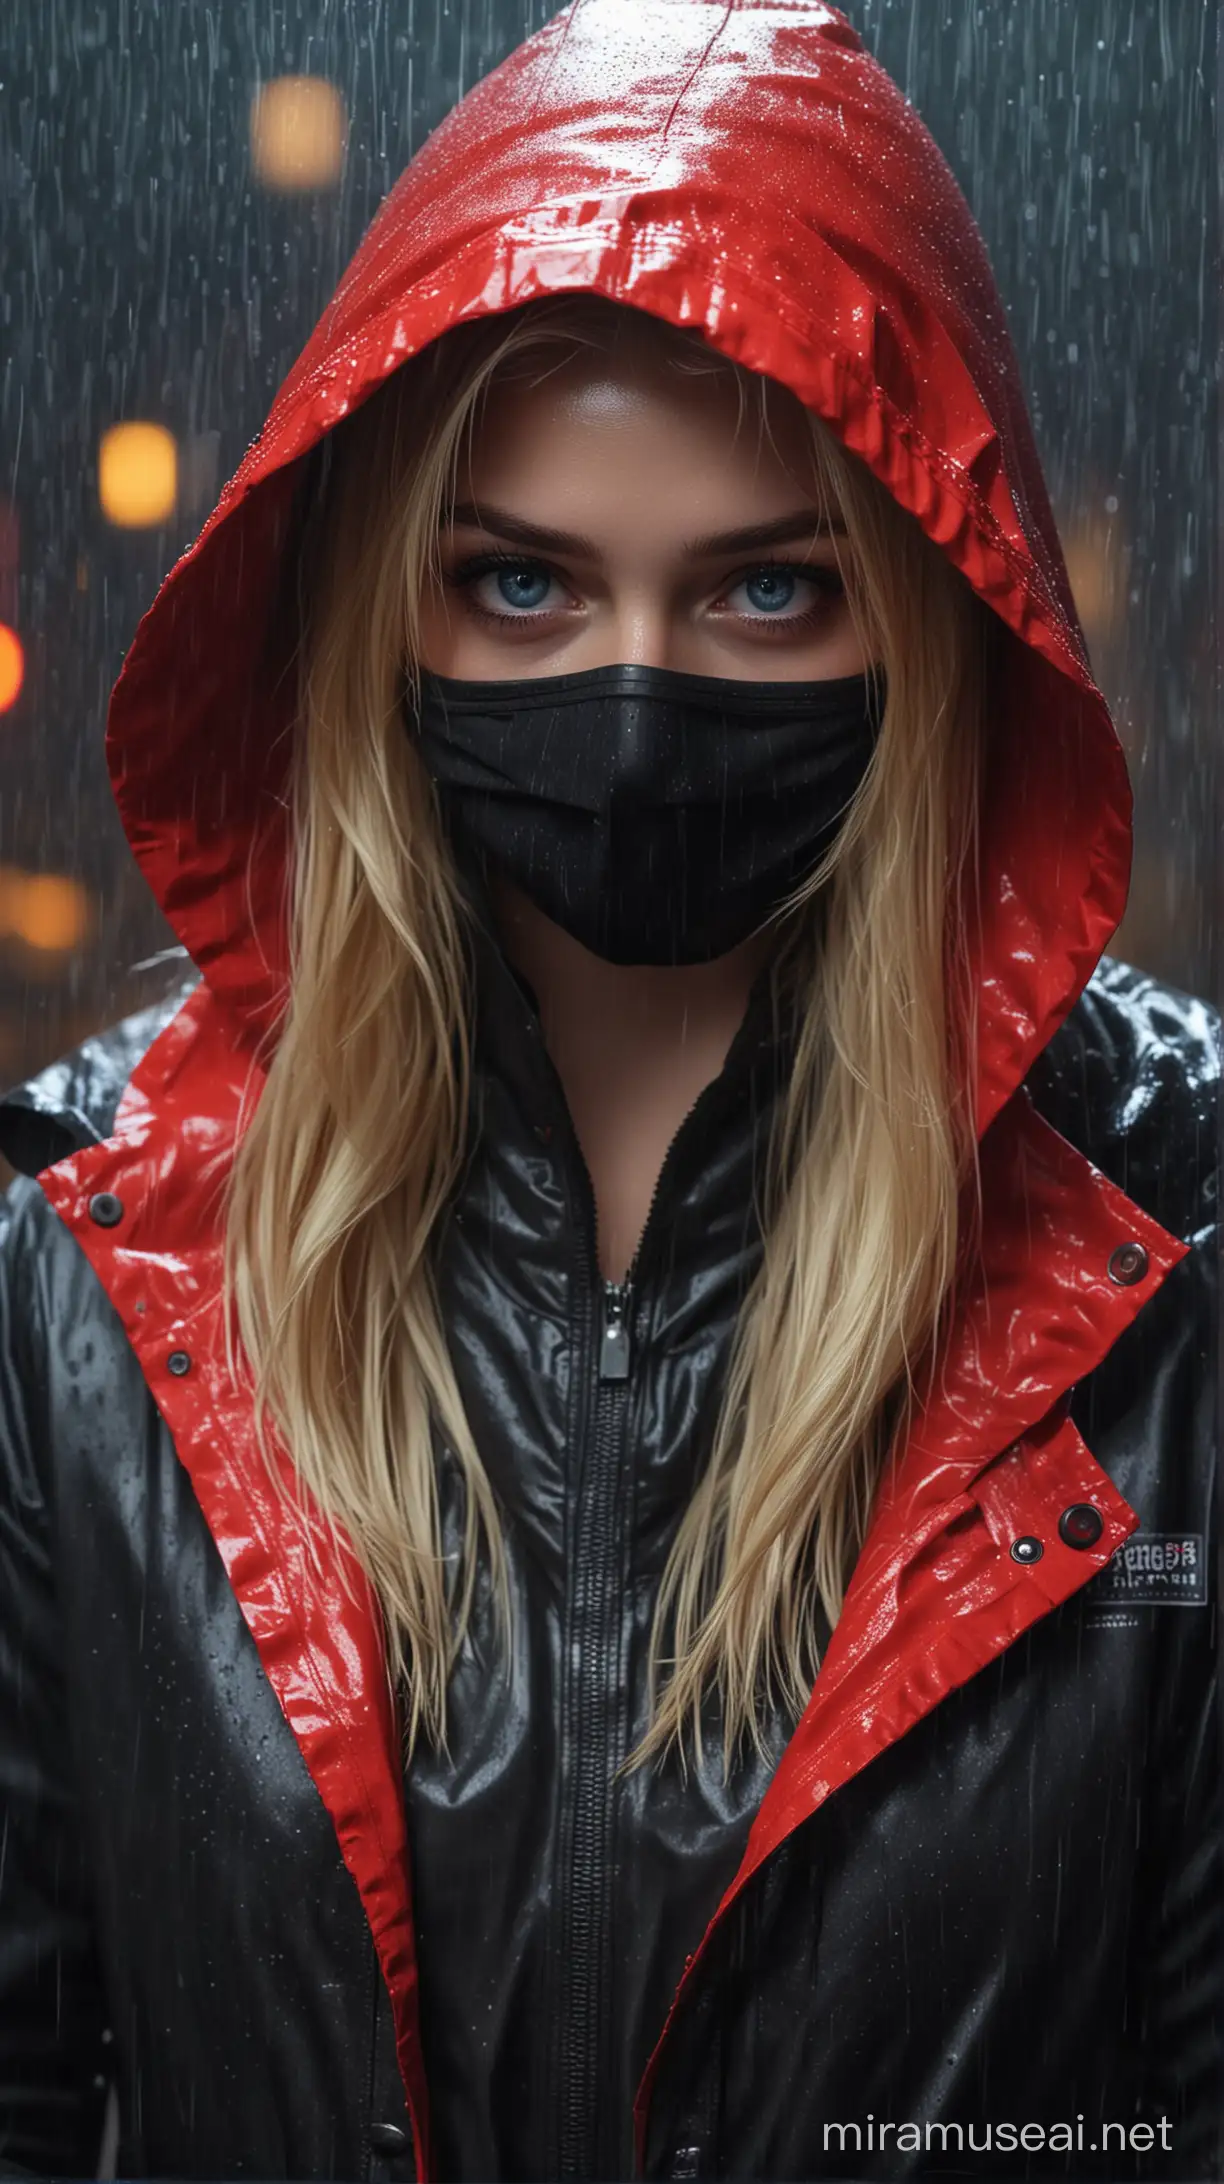 A girl with blonde hair and blue eyes, wearing a black and red jacket and a protective mask. They are standing in the rain and have a hood on. The background is dark and there are red lights in the corners.oil element ,neon ambience technic